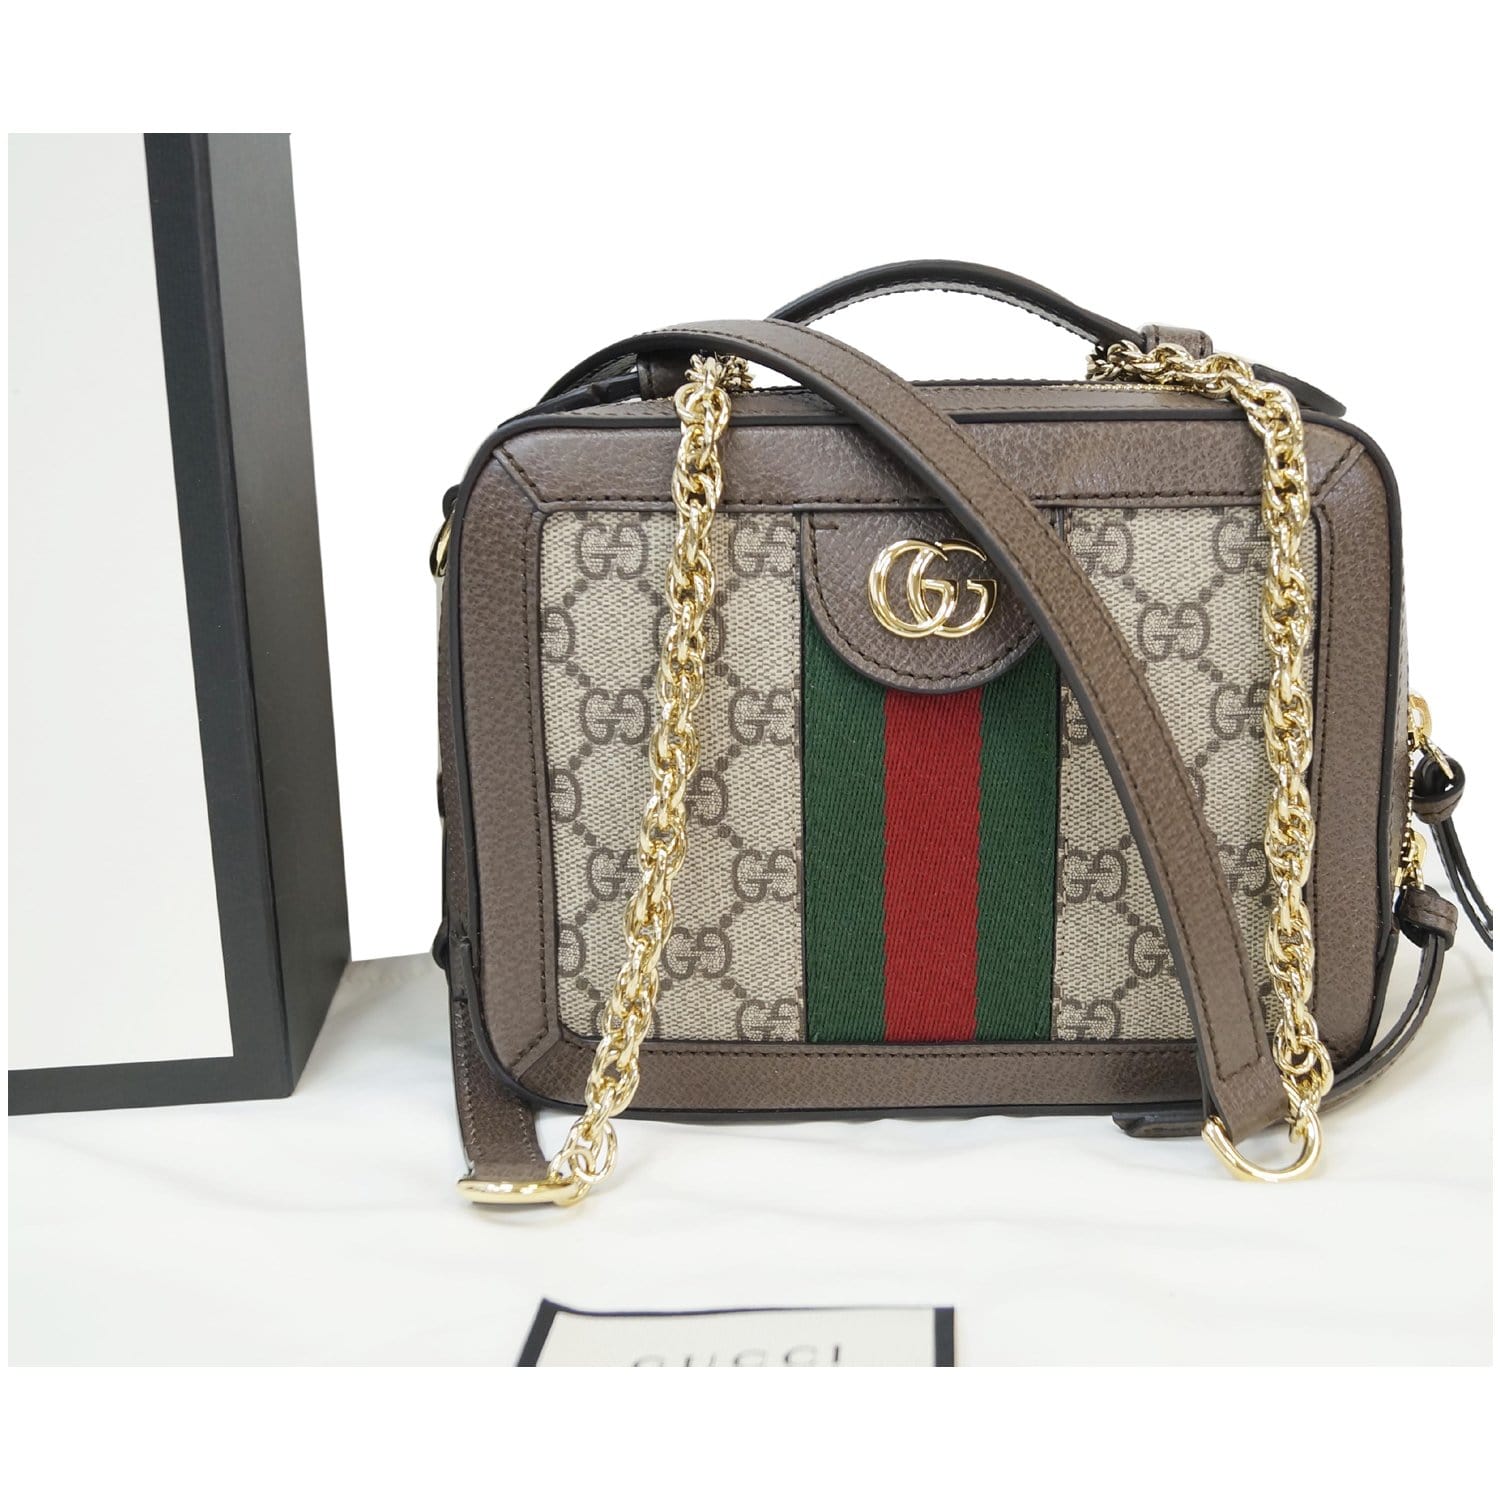 Gucci Ophidia Square Shoulder Bag in Brown